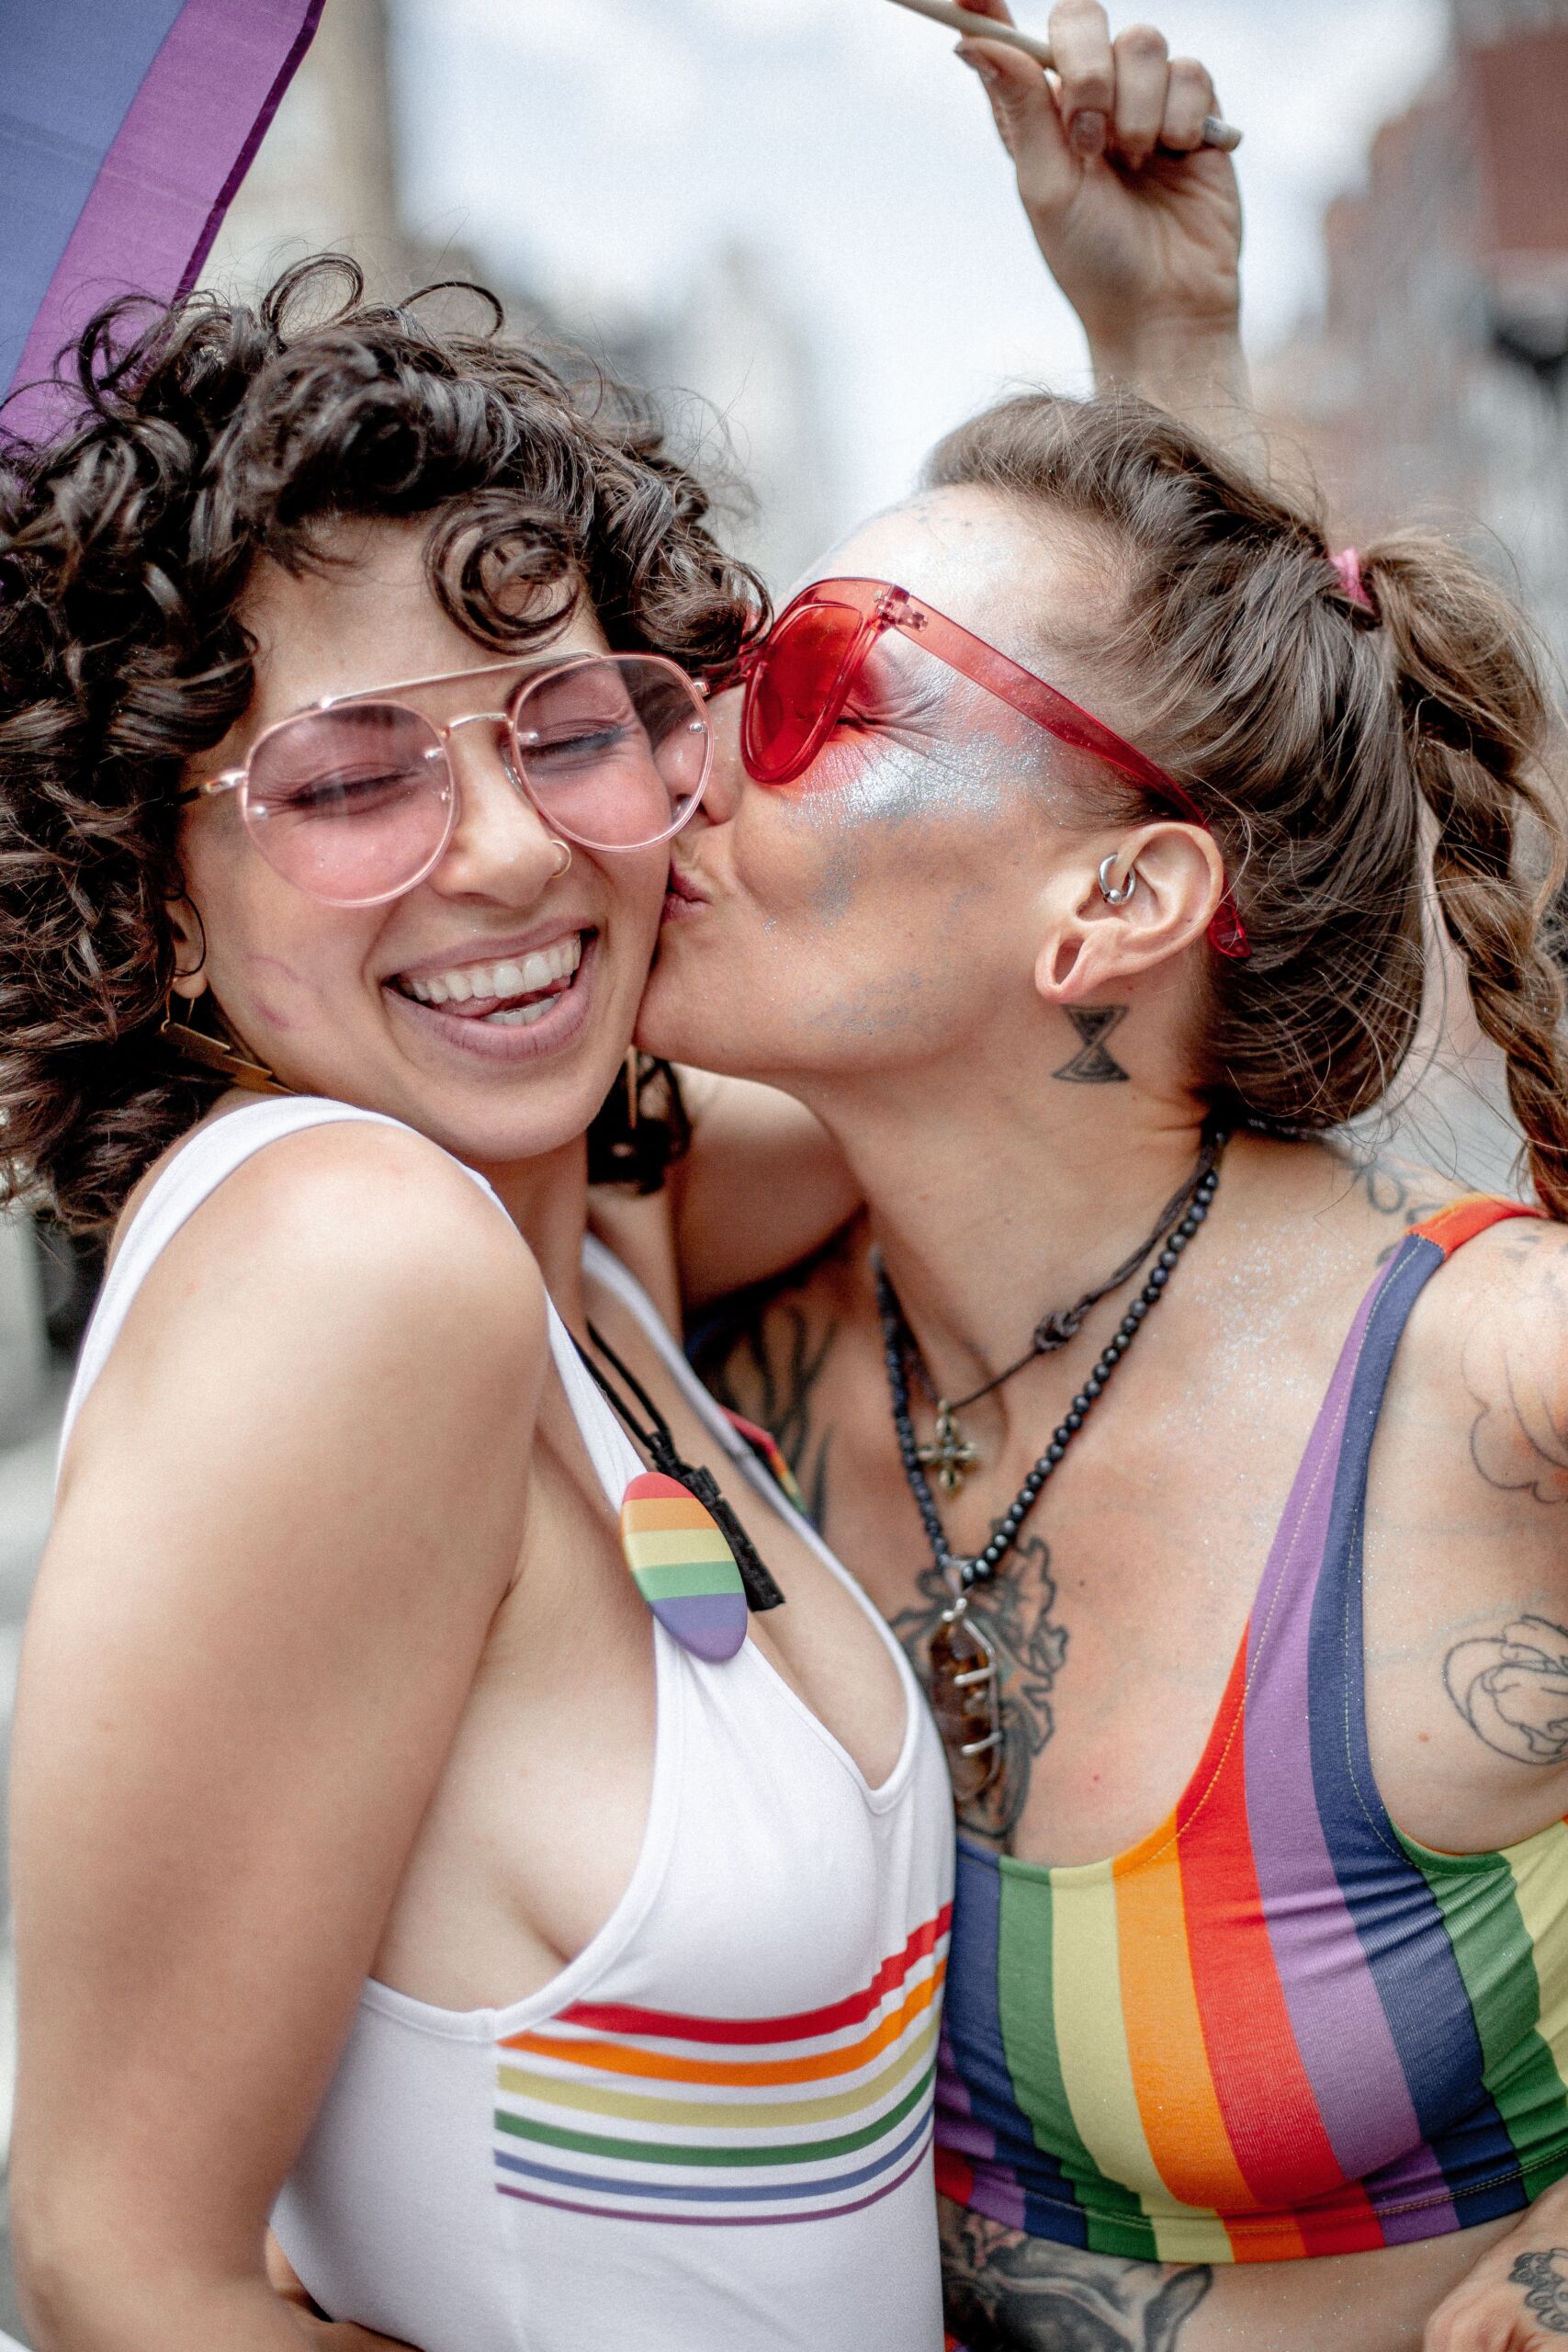 Woman in pink sunglasses kissing curly haired woman on the cheek